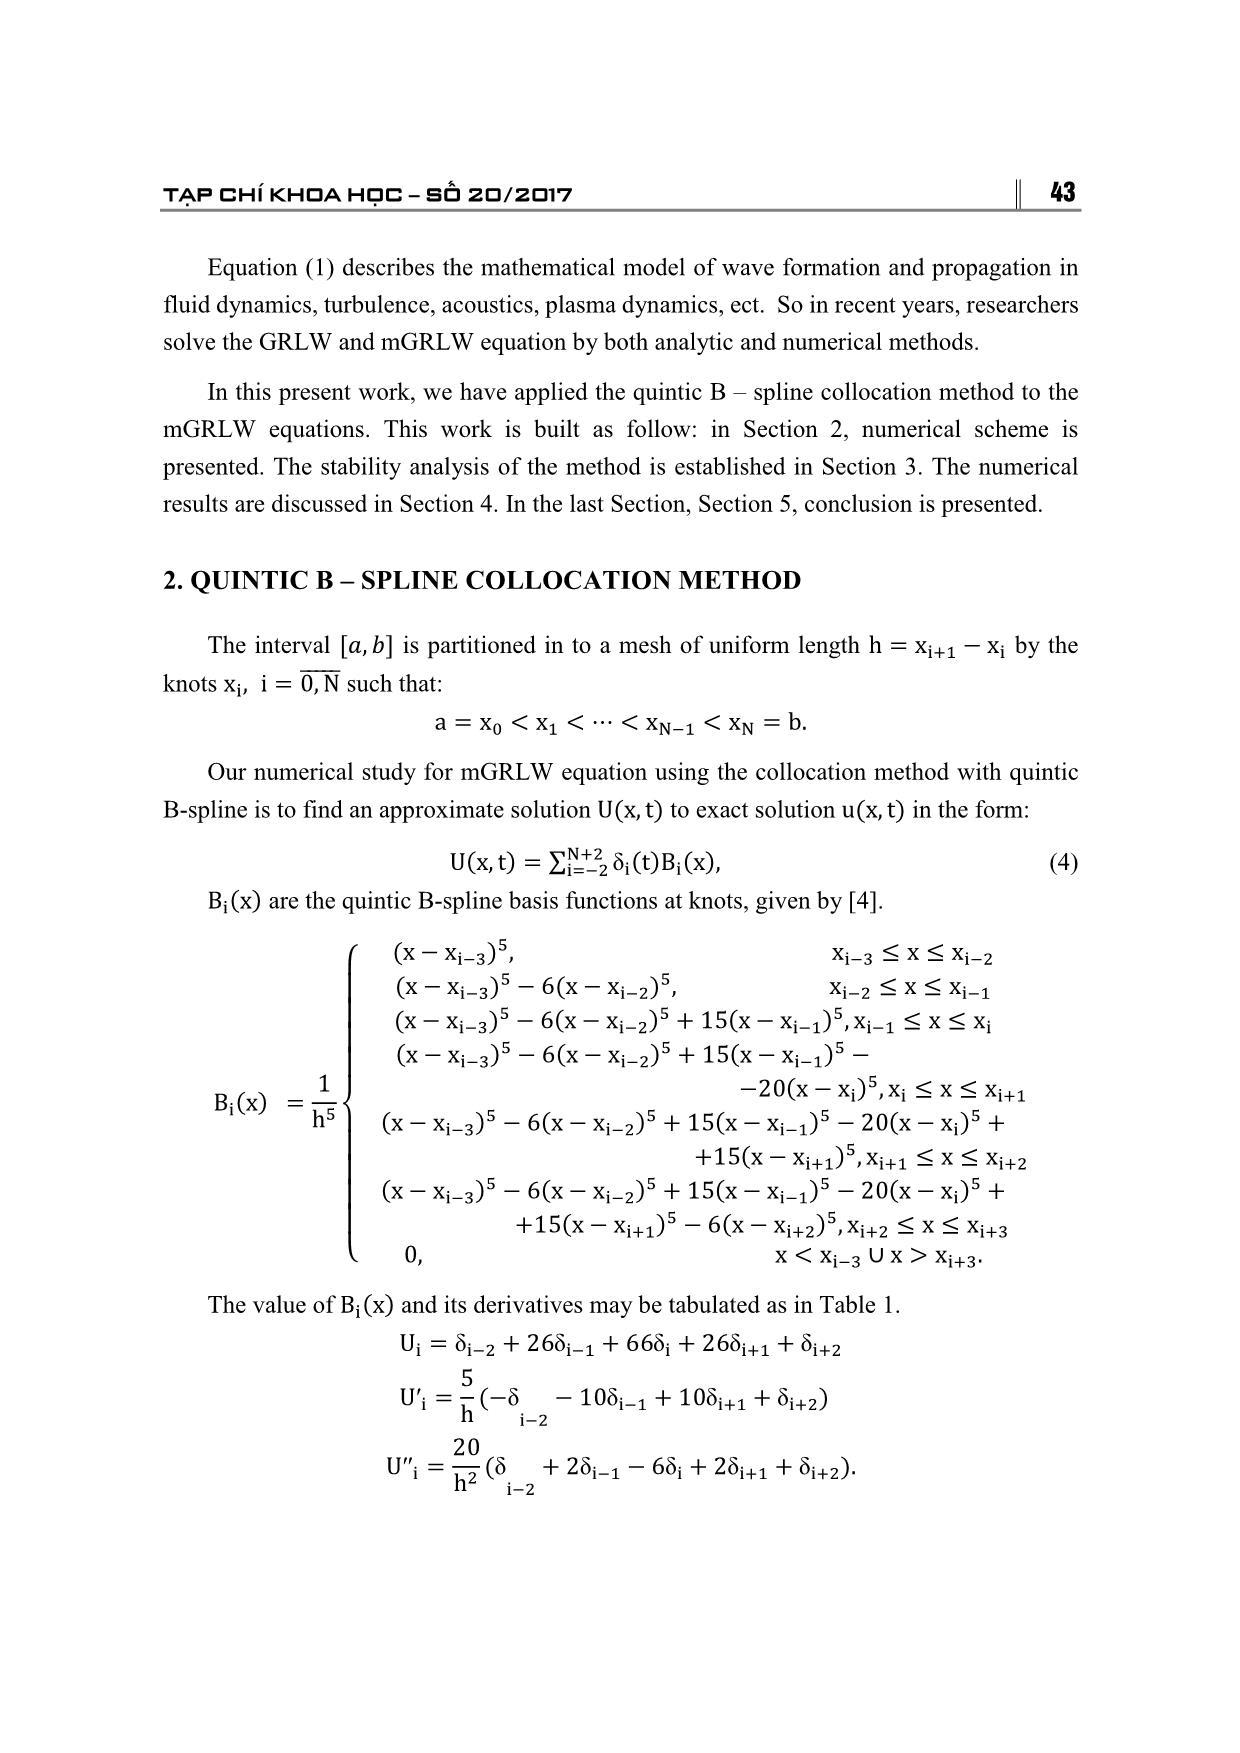 A new method for solving the mgrlw equation using a base of quintic B-Spline trang 2